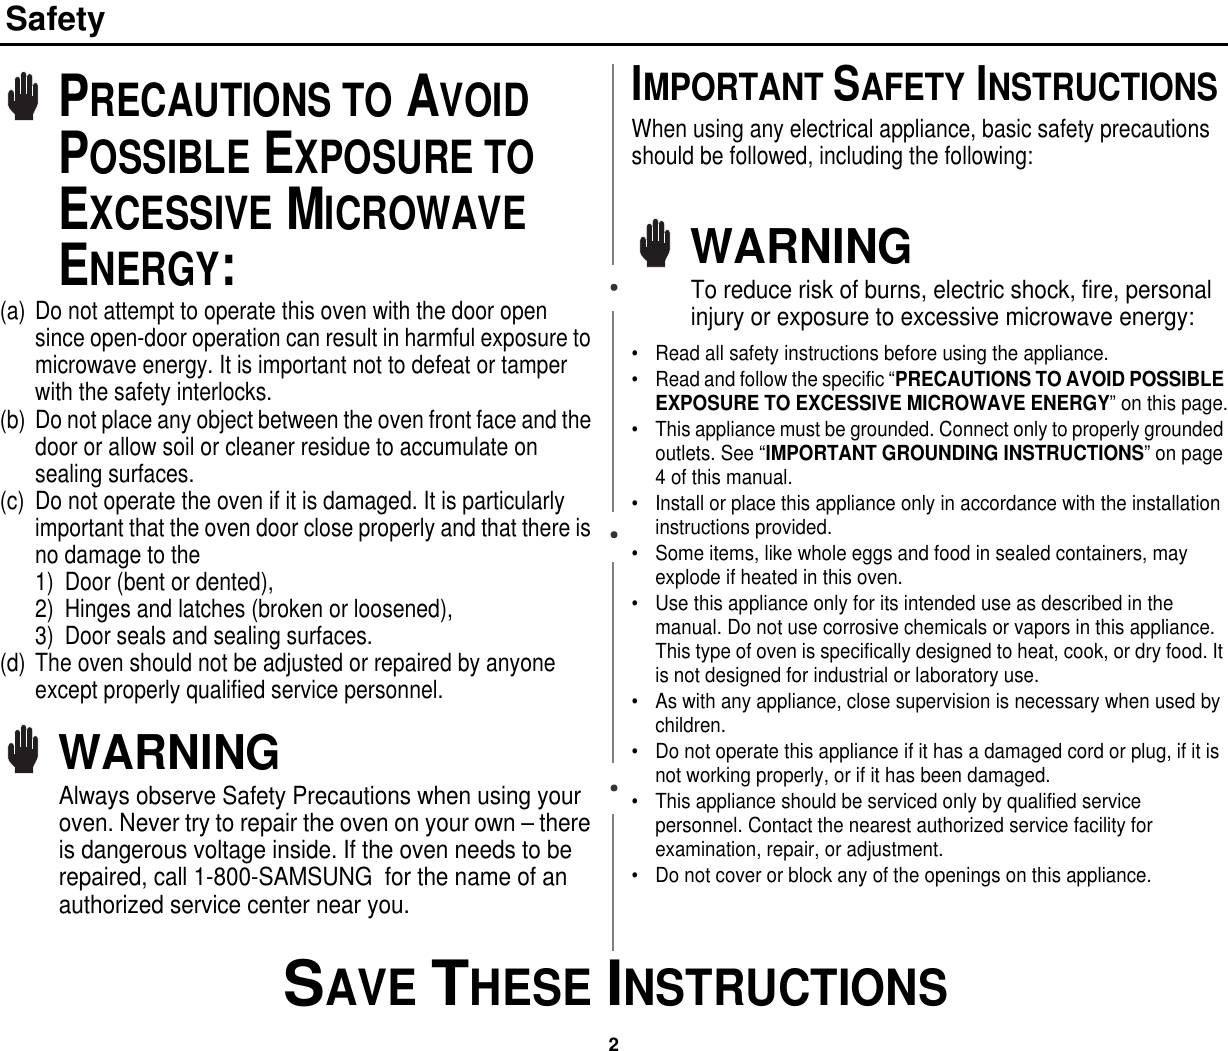 2 SAVE THESE INSTRUCTIONSSafetyPRECAUTIONS TO AVOID POSSIBLE EXPOSURE TO EXCESSIVE MICROWAVE ENERGY:(a) Do not attempt to operate this oven with the door open since open-door operation can result in harmful exposure to microwave energy. It is important not to defeat or tamper with the safety interlocks.(b) Do not place any object between the oven front face and the door or allow soil or cleaner residue to accumulate on sealing surfaces.(c) Do not operate the oven if it is damaged. It is particularly important that the oven door close properly and that there is no damage to the 1) Door (bent or dented), 2) Hinges and latches (broken or loosened), 3) Door seals and sealing surfaces.(d) The oven should not be adjusted or repaired by anyone except properly qualified service personnel.WARNINGAlways observe Safety Precautions when using your oven. Never try to repair the oven on your own – there is dangerous voltage inside. If the oven needs to be repaired, call 1-800-SAMSUNG  for the name of an authorized service center near you.IMPORTANT SAFETY INSTRUCTIONSWhen using any electrical appliance, basic safety precautions should be followed, including the following:WARNINGTo reduce risk of burns, electric shock, fire, personal injury or exposure to excessive microwave energy:• Read all safety instructions before using the appliance.• Read and follow the specific “PRECAUTIONS TO AVOID POSSIBLE EXPOSURE TO EXCESSIVE MICROWAVE ENERGY” on this page.• This appliance must be grounded. Connect only to properly grounded outlets. See “IMPORTANT GROUNDING INSTRUCTIONS” on page 4 of this manual. • Install or place this appliance only in accordance with the installation instructions provided.• Some items, like whole eggs and food in sealed containers, may explode if heated in this oven.• Use this appliance only for its intended use as described in the manual. Do not use corrosive chemicals or vapors in this appliance. This type of oven is specifically designed to heat, cook, or dry food. It is not designed for industrial or laboratory use.• As with any appliance, close supervision is necessary when used by children.• Do not operate this appliance if it has a damaged cord or plug, if it is not working properly, or if it has been damaged.• This appliance should be serviced only by qualified service personnel. Contact the nearest authorized service facility for examination, repair, or adjustment.• Do not cover or block any of the openings on this appliance.